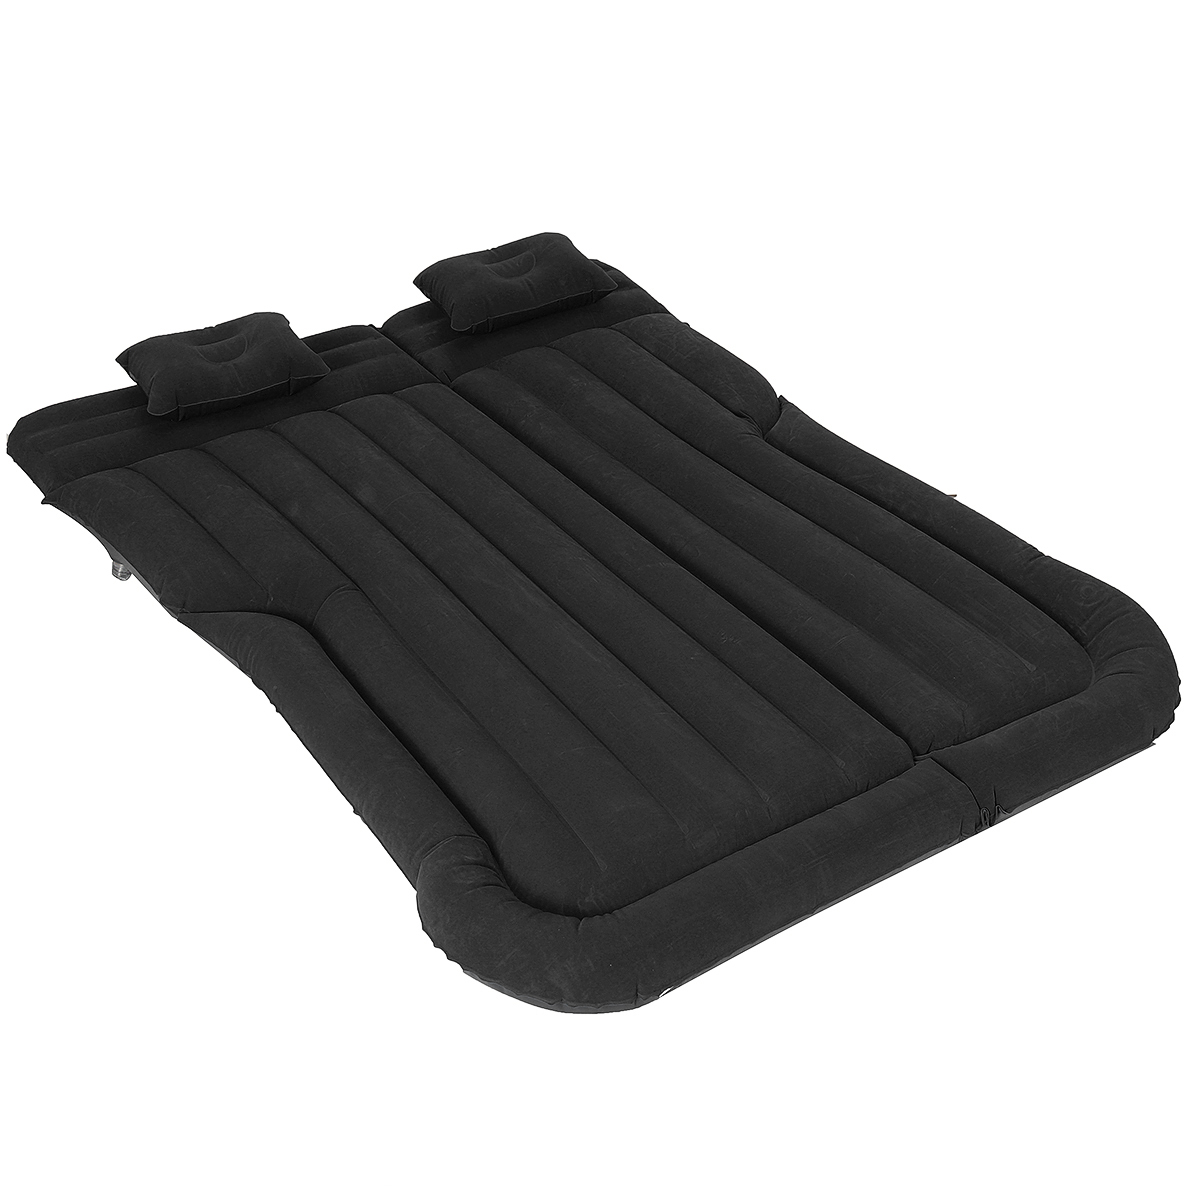 180x130cm-Multifunctional-Inflatable-Car-Air-Mattress-Durable-Back-Seat-Cover-Travel-Bed-Moisture-pr-1888970-13